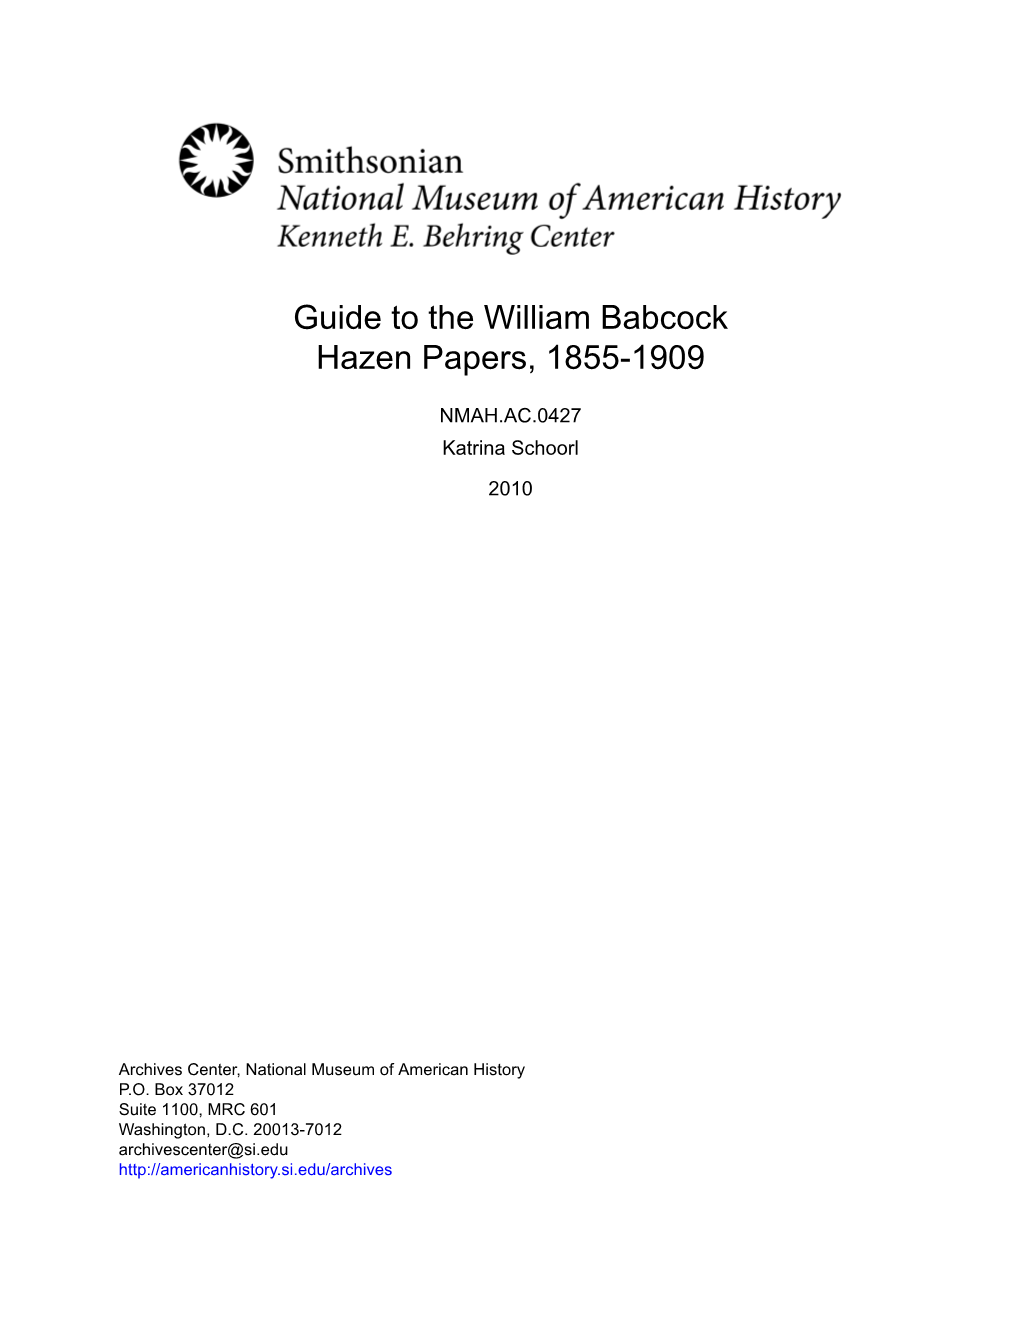 Guide to the William Babcock Hazen Papers, 1855-1909